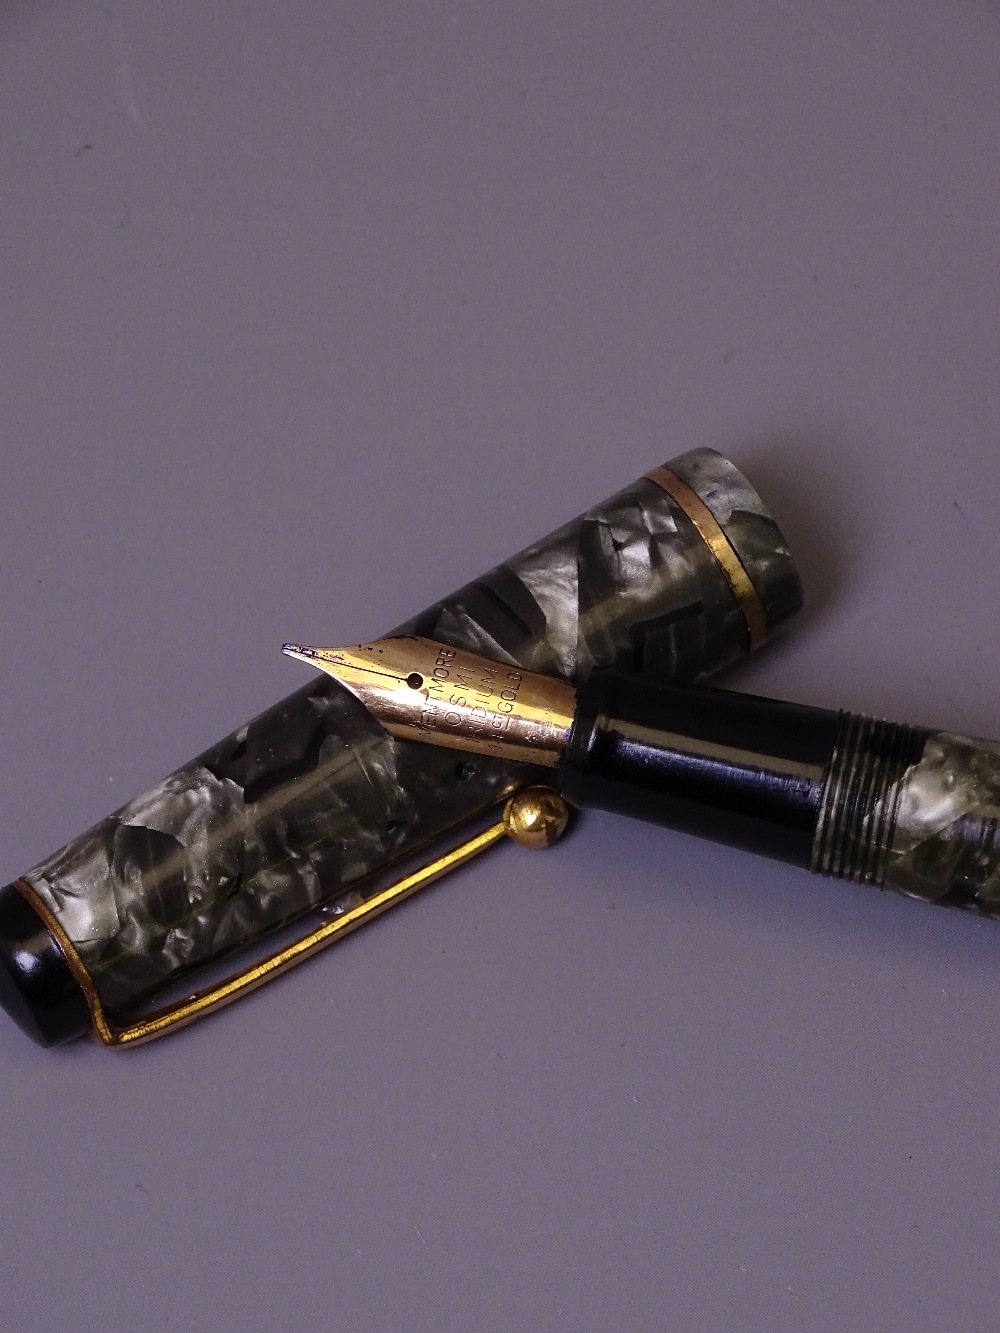 MENTMORE - Vintage (1940s) Grey Marble Mentmore Auto-Flow fountain pen with gold plated trim and - Image 2 of 4